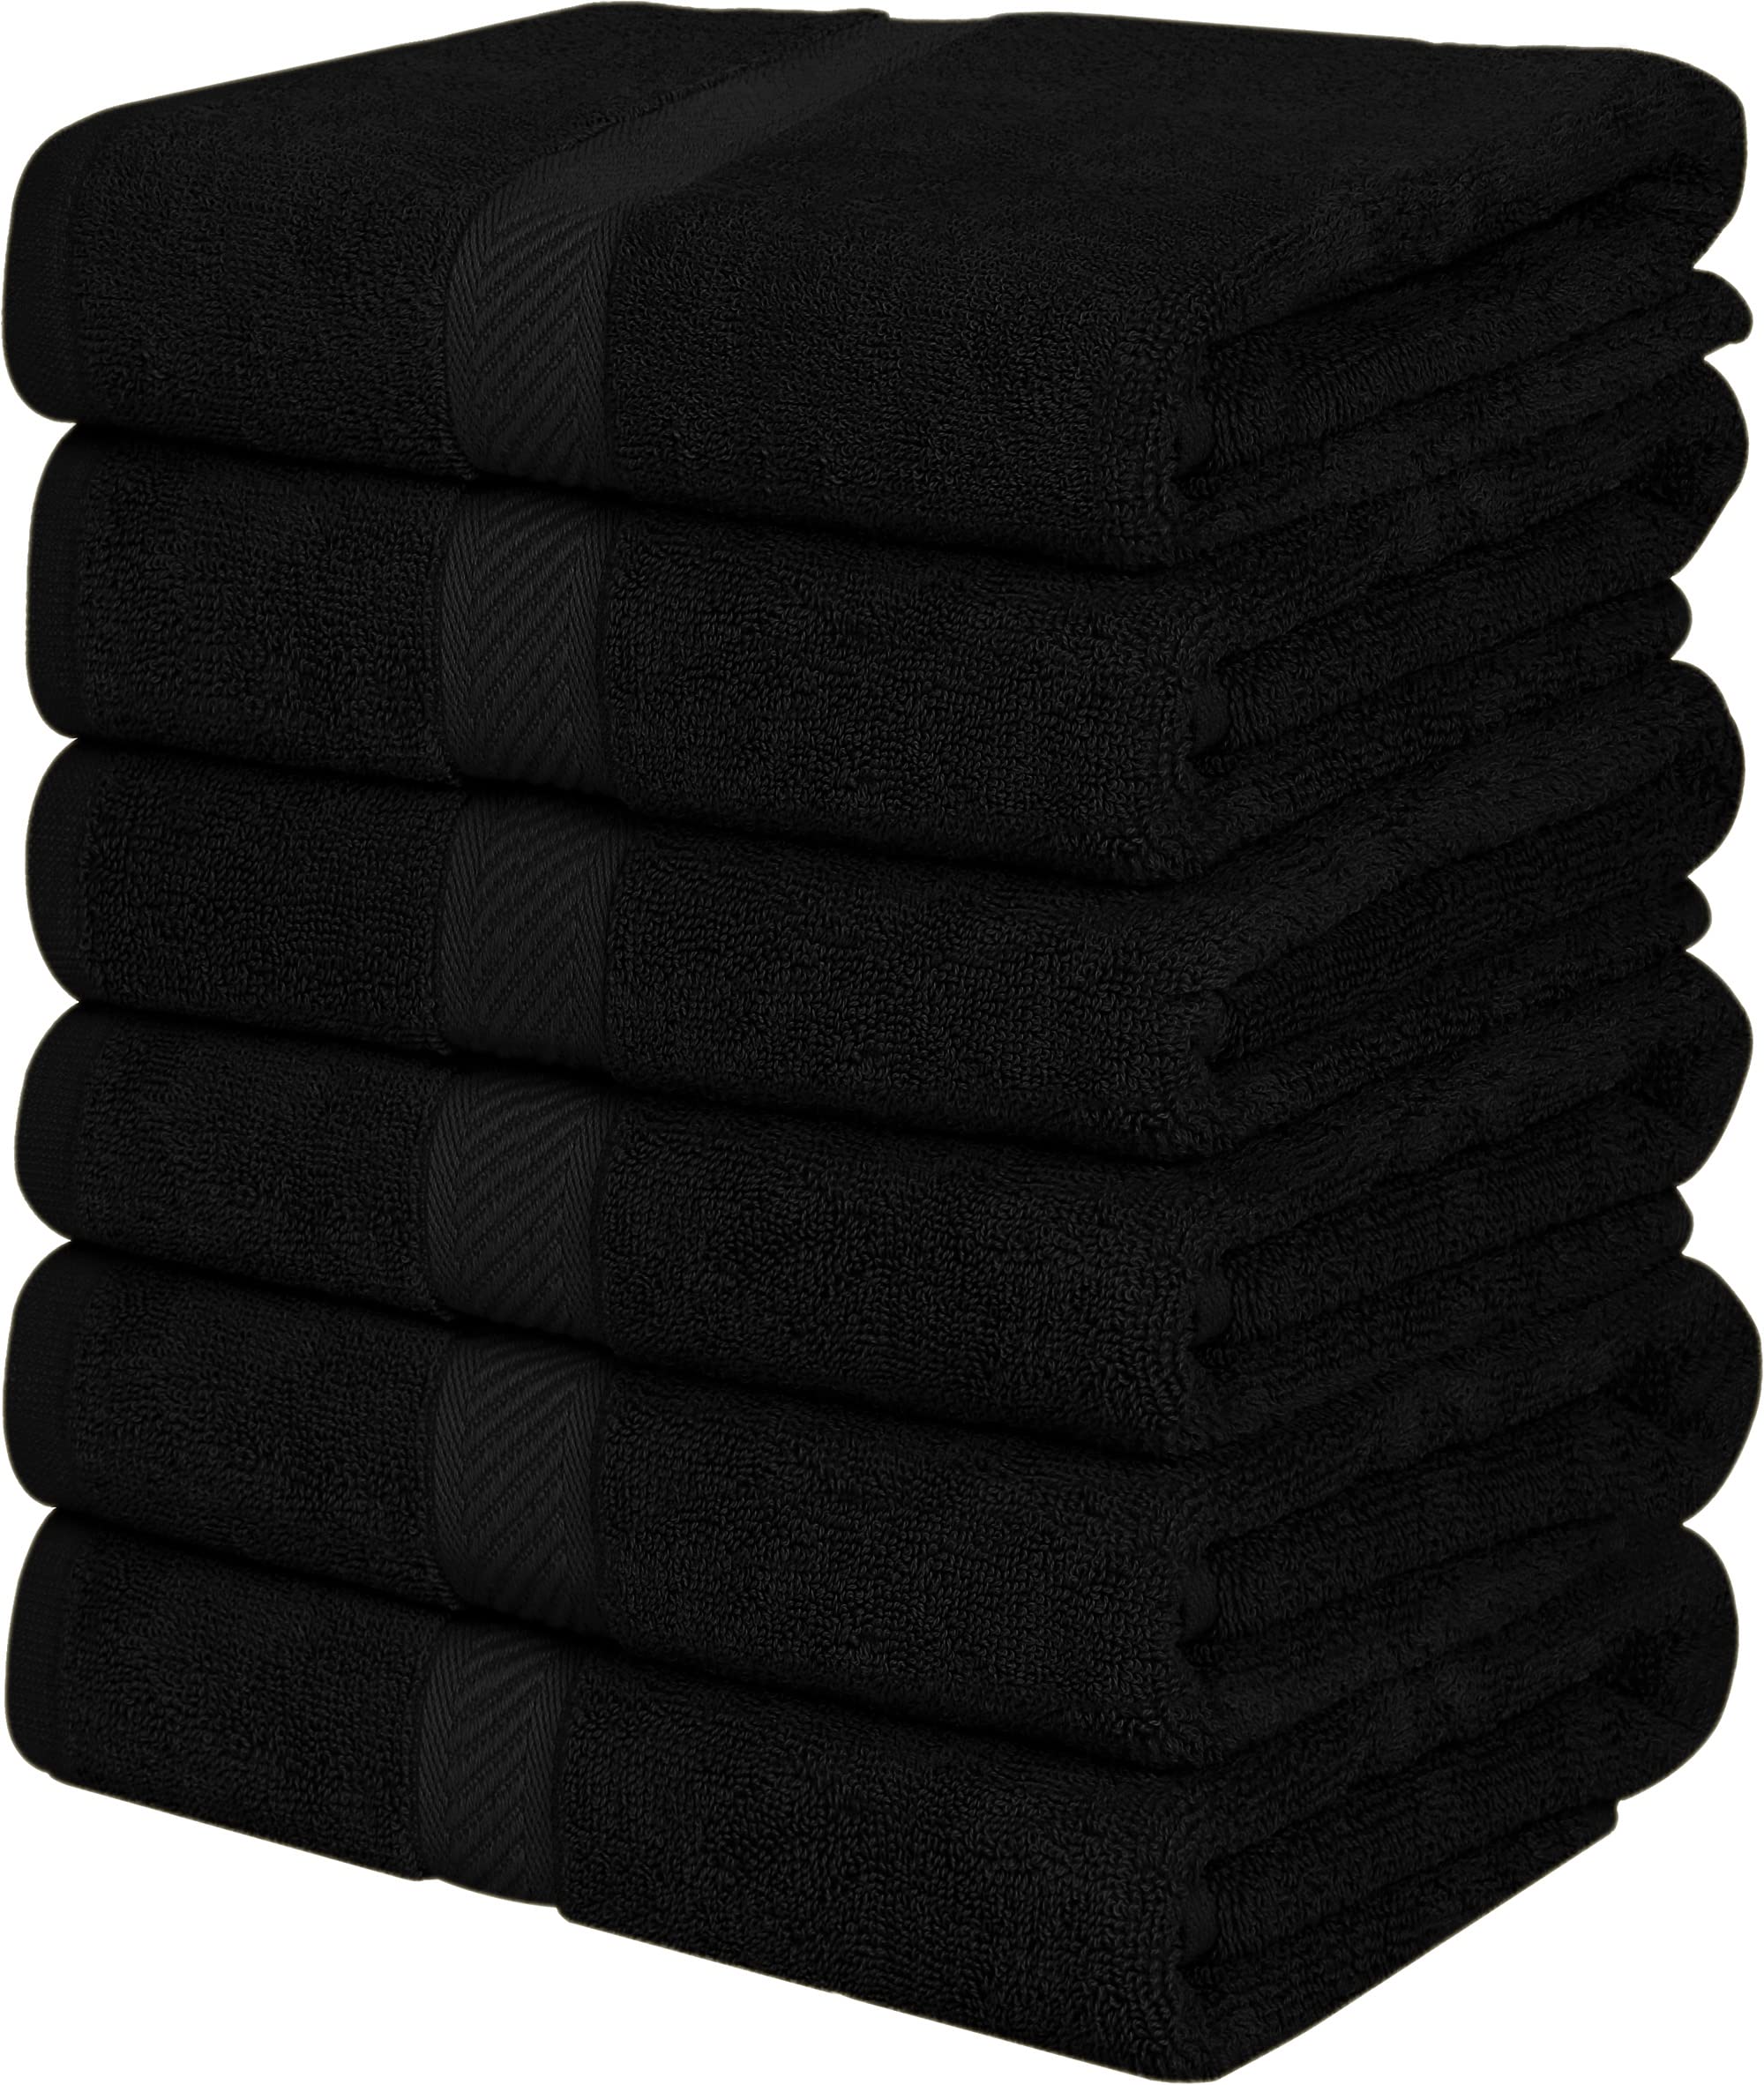 Utopia Towels 6 Pack Medium Bath Towel Set, 100% Ring Spun Cotton (24 x 48 Inches) Medium Lightweight and Highly Absorbent Quick